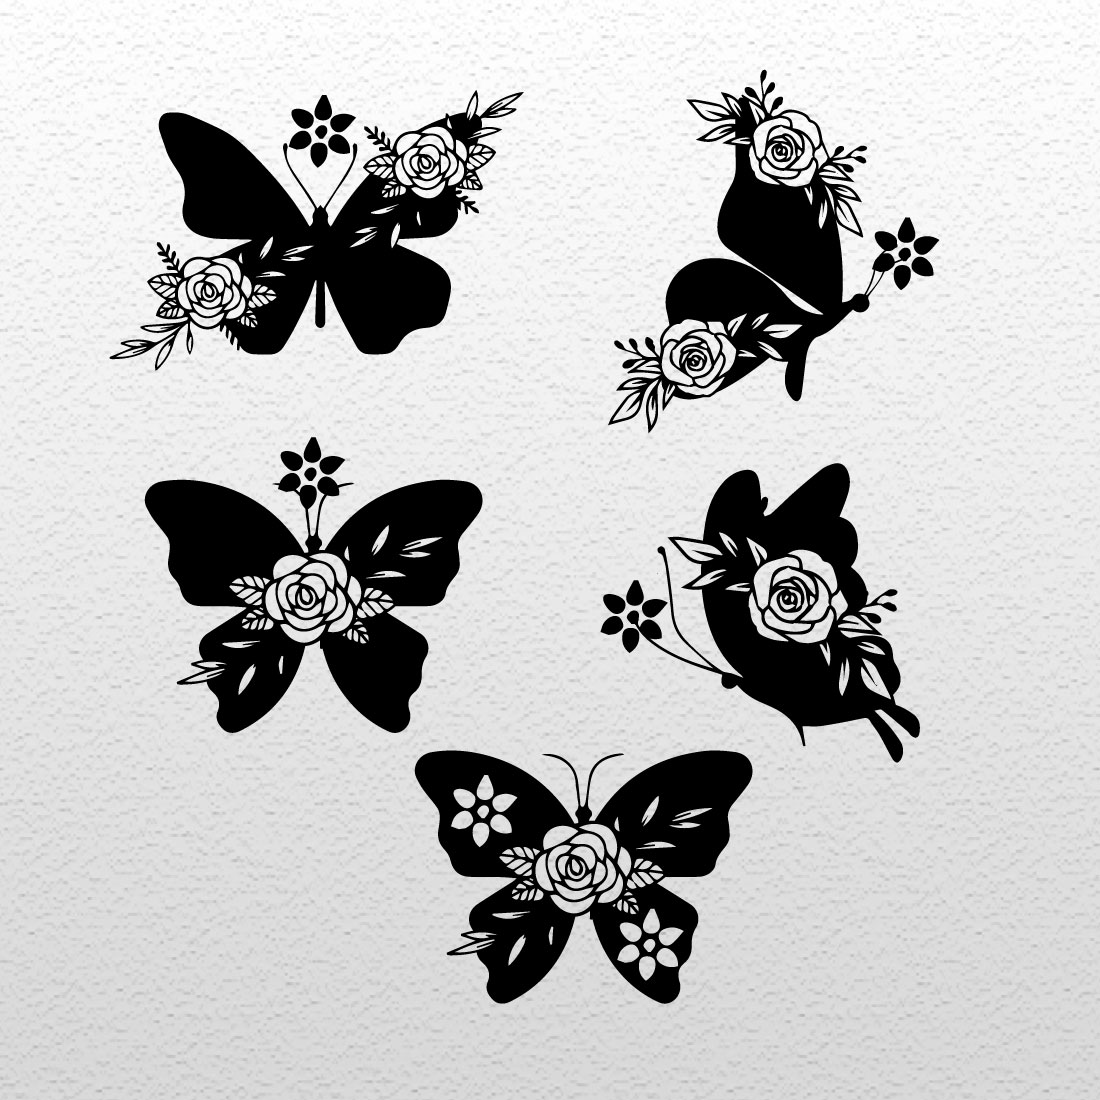 Set of four butterflies with flowers on them.